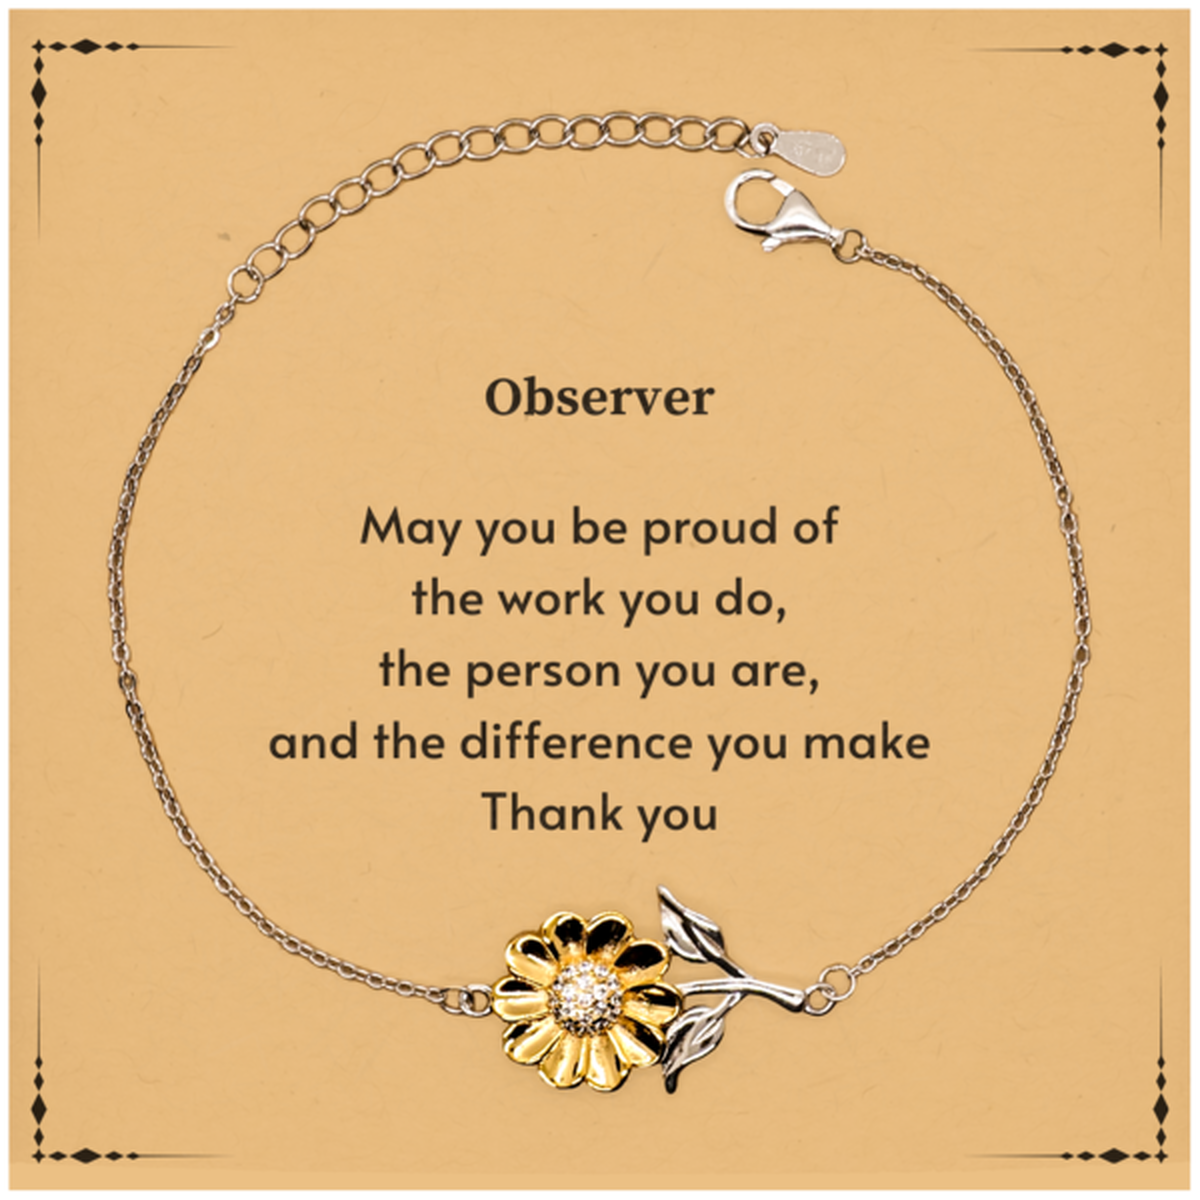 Heartwarming Sunflower Bracelet Retirement Coworkers Gifts for Observer, Observer May You be proud of the work you do, the person you are Gifts for Boss Men Women Friends